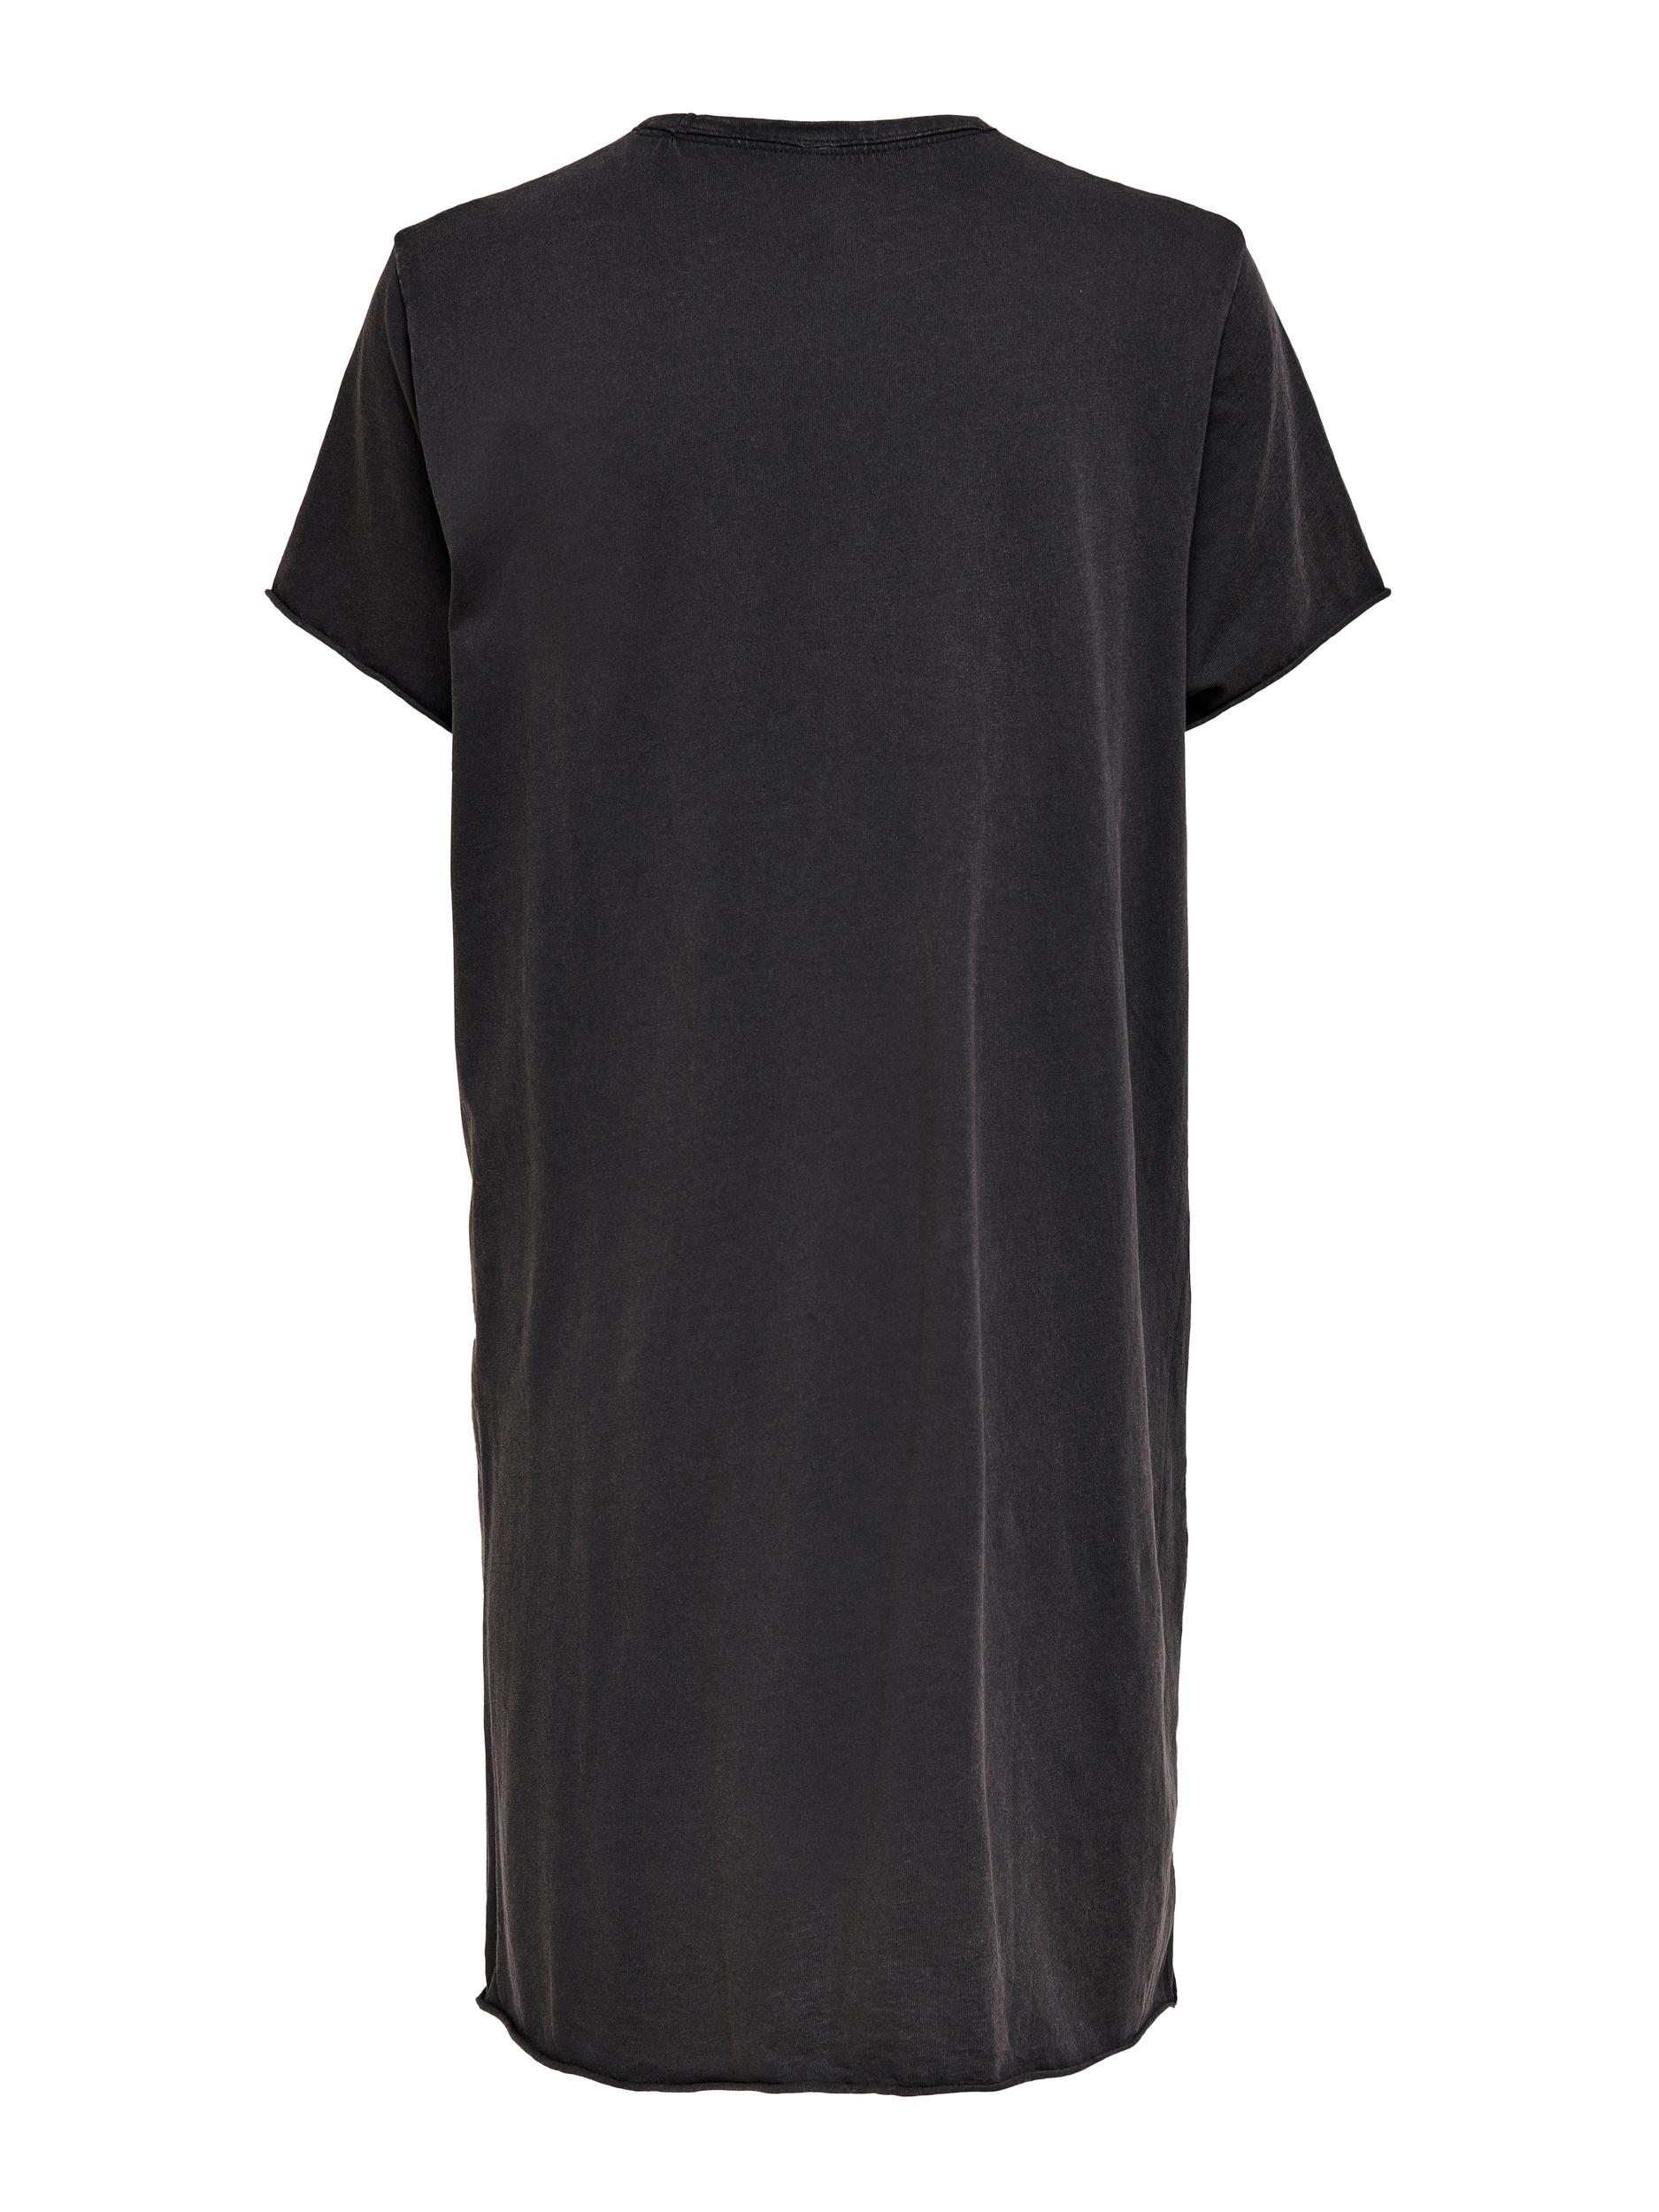 Lucy faded look t-shirt dress, BLACK, large